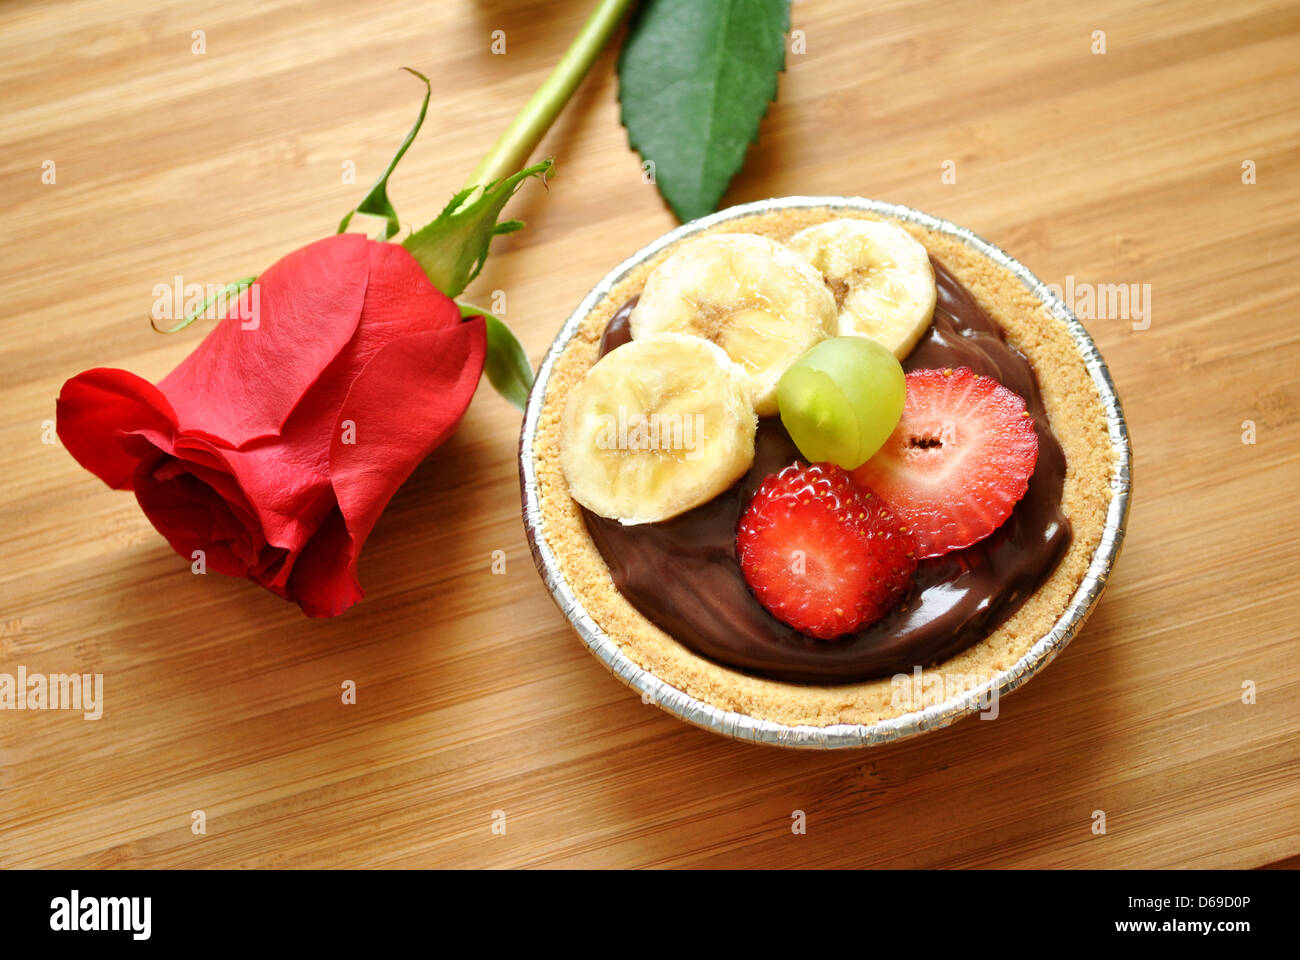 Pudding Fruit Dessert with a Rose Stock Photo